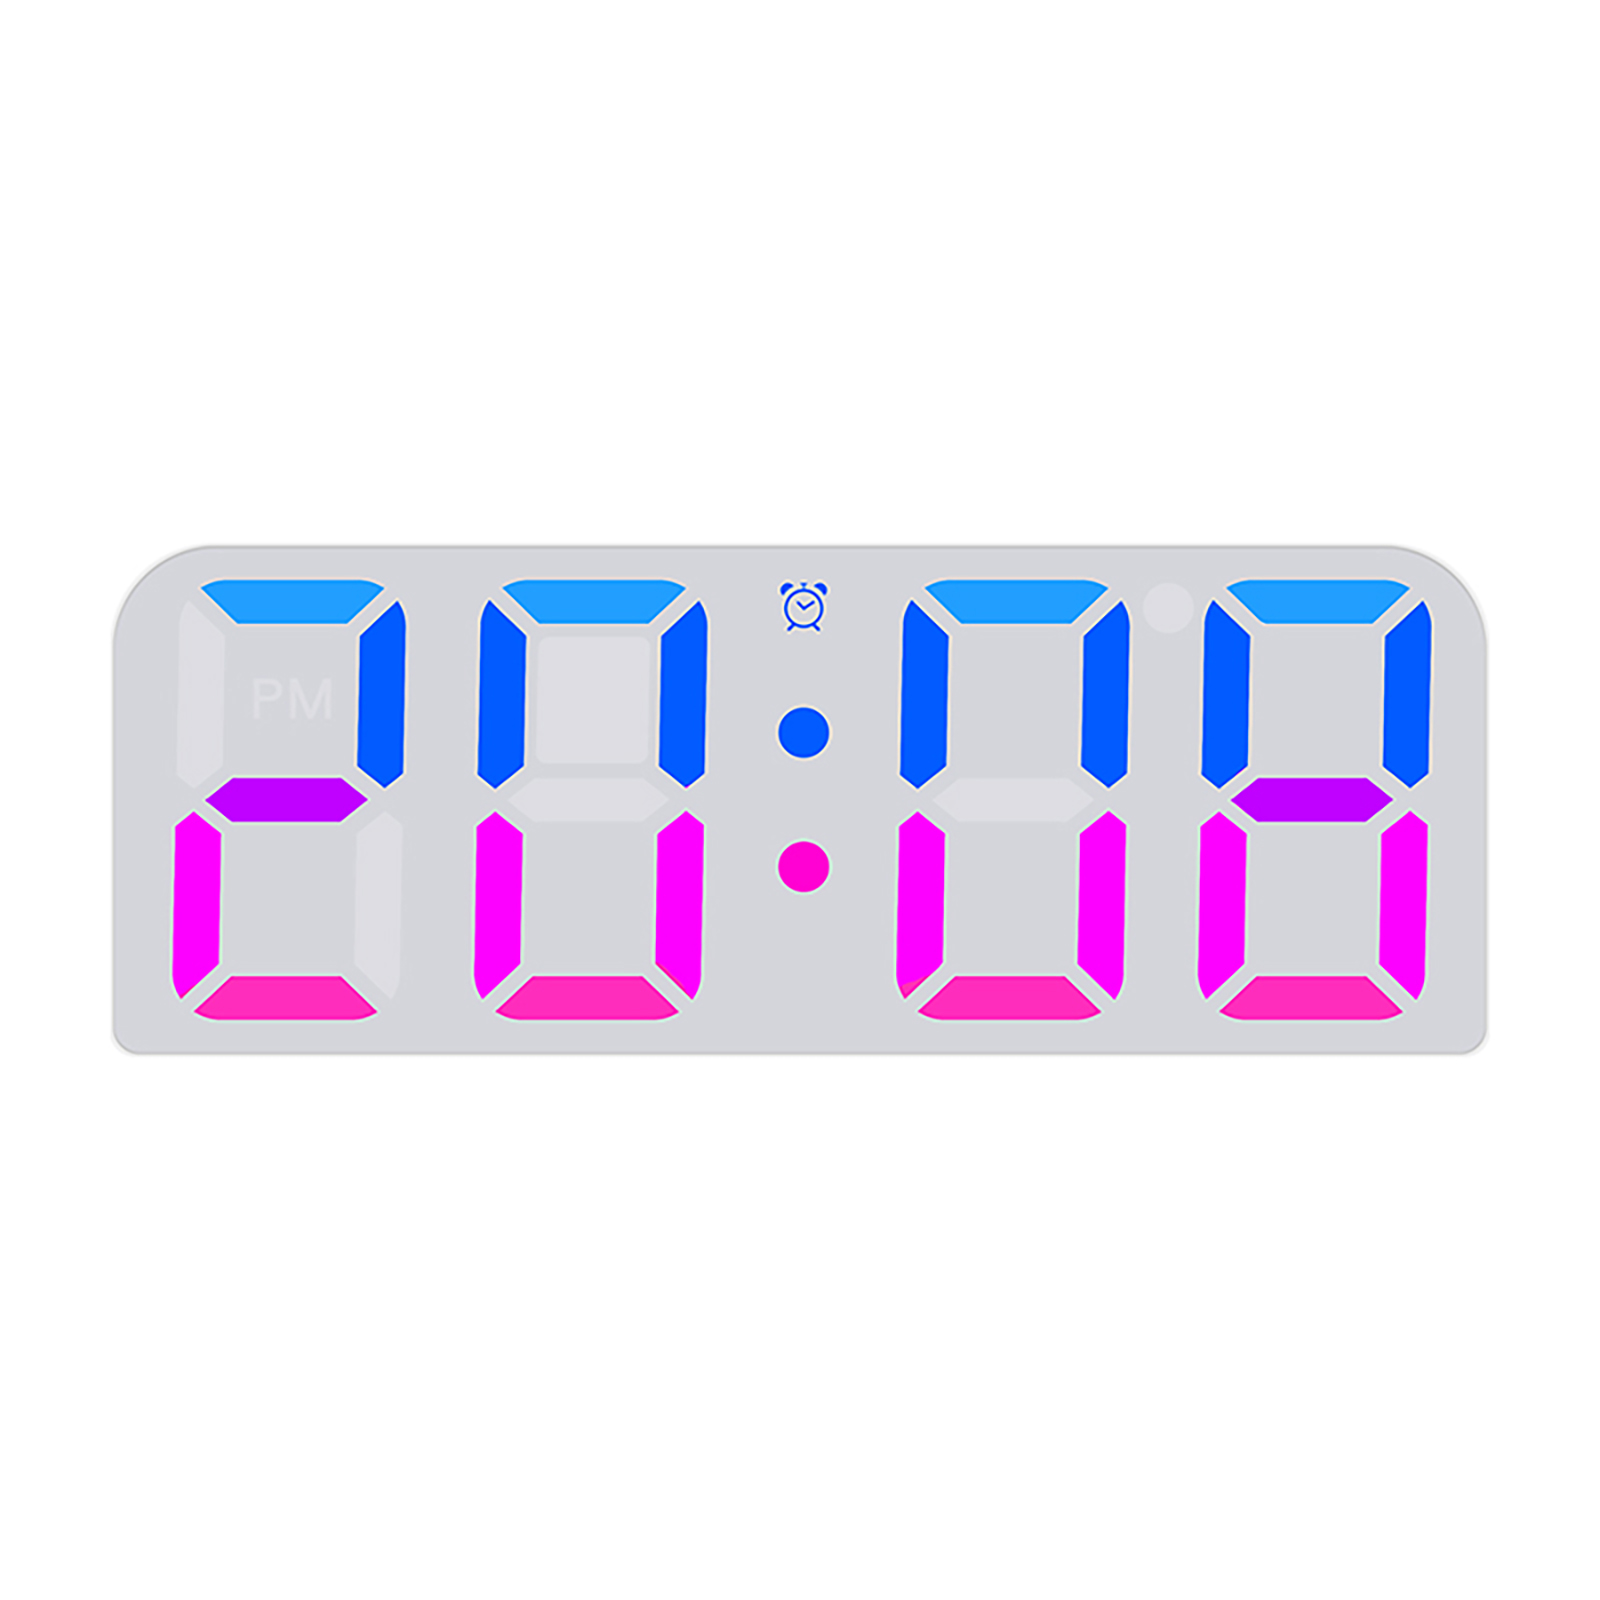 Digital Wall Clock 12/24 Hour Format With Automatic Night Mode LED Big Digits Clock For Farmhouse Kitchen Office White Shell Symphony